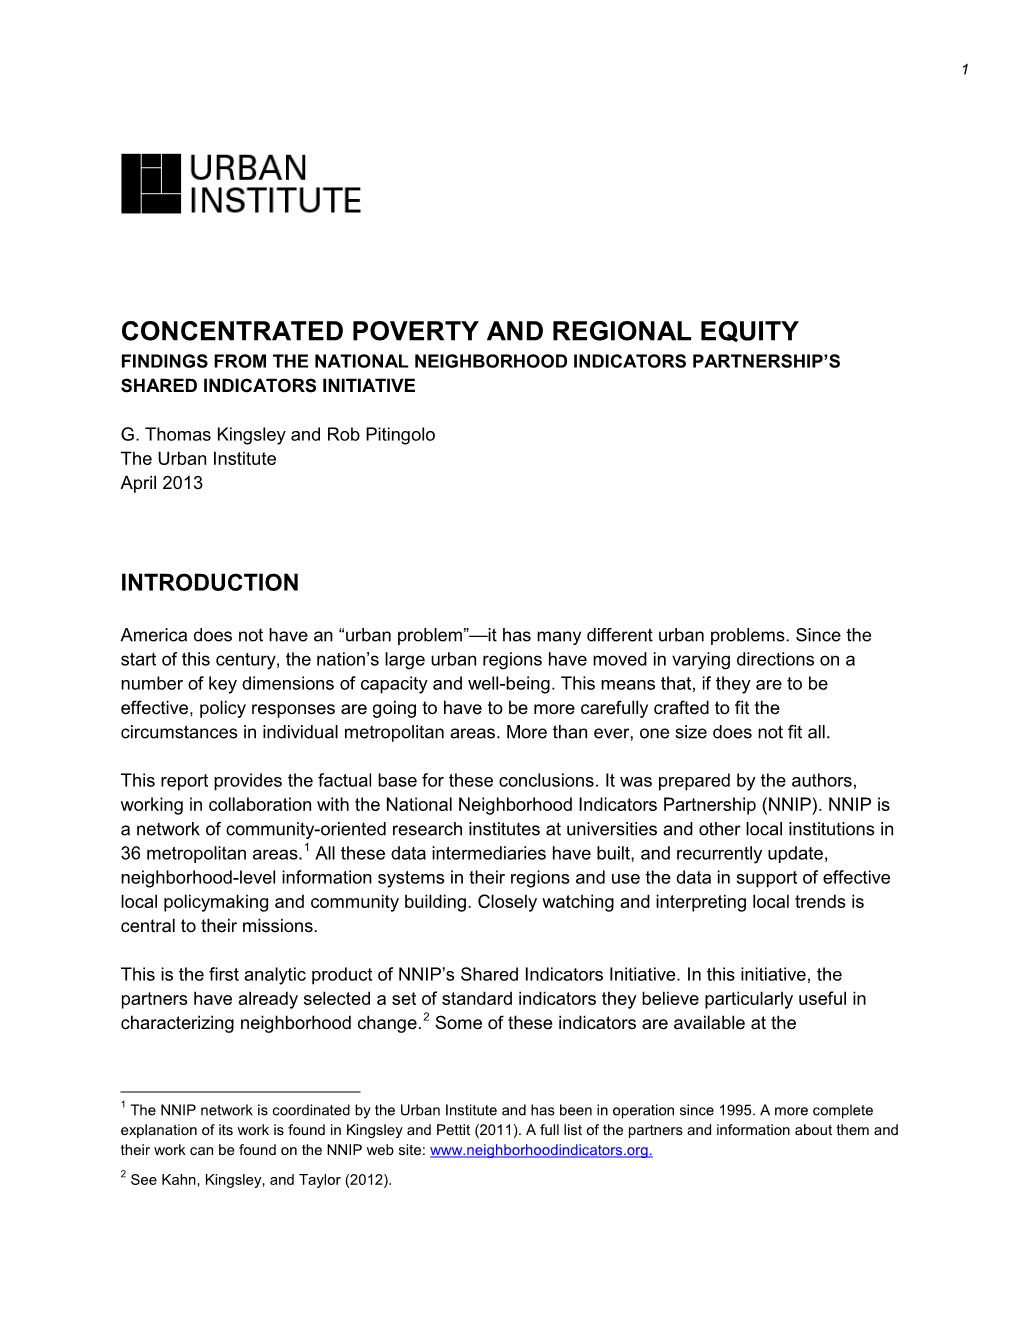 Concentrated Poverty and Regional Equity Findings from the National Neighborhood Indicators Partnership’S Shared Indicators Initiative